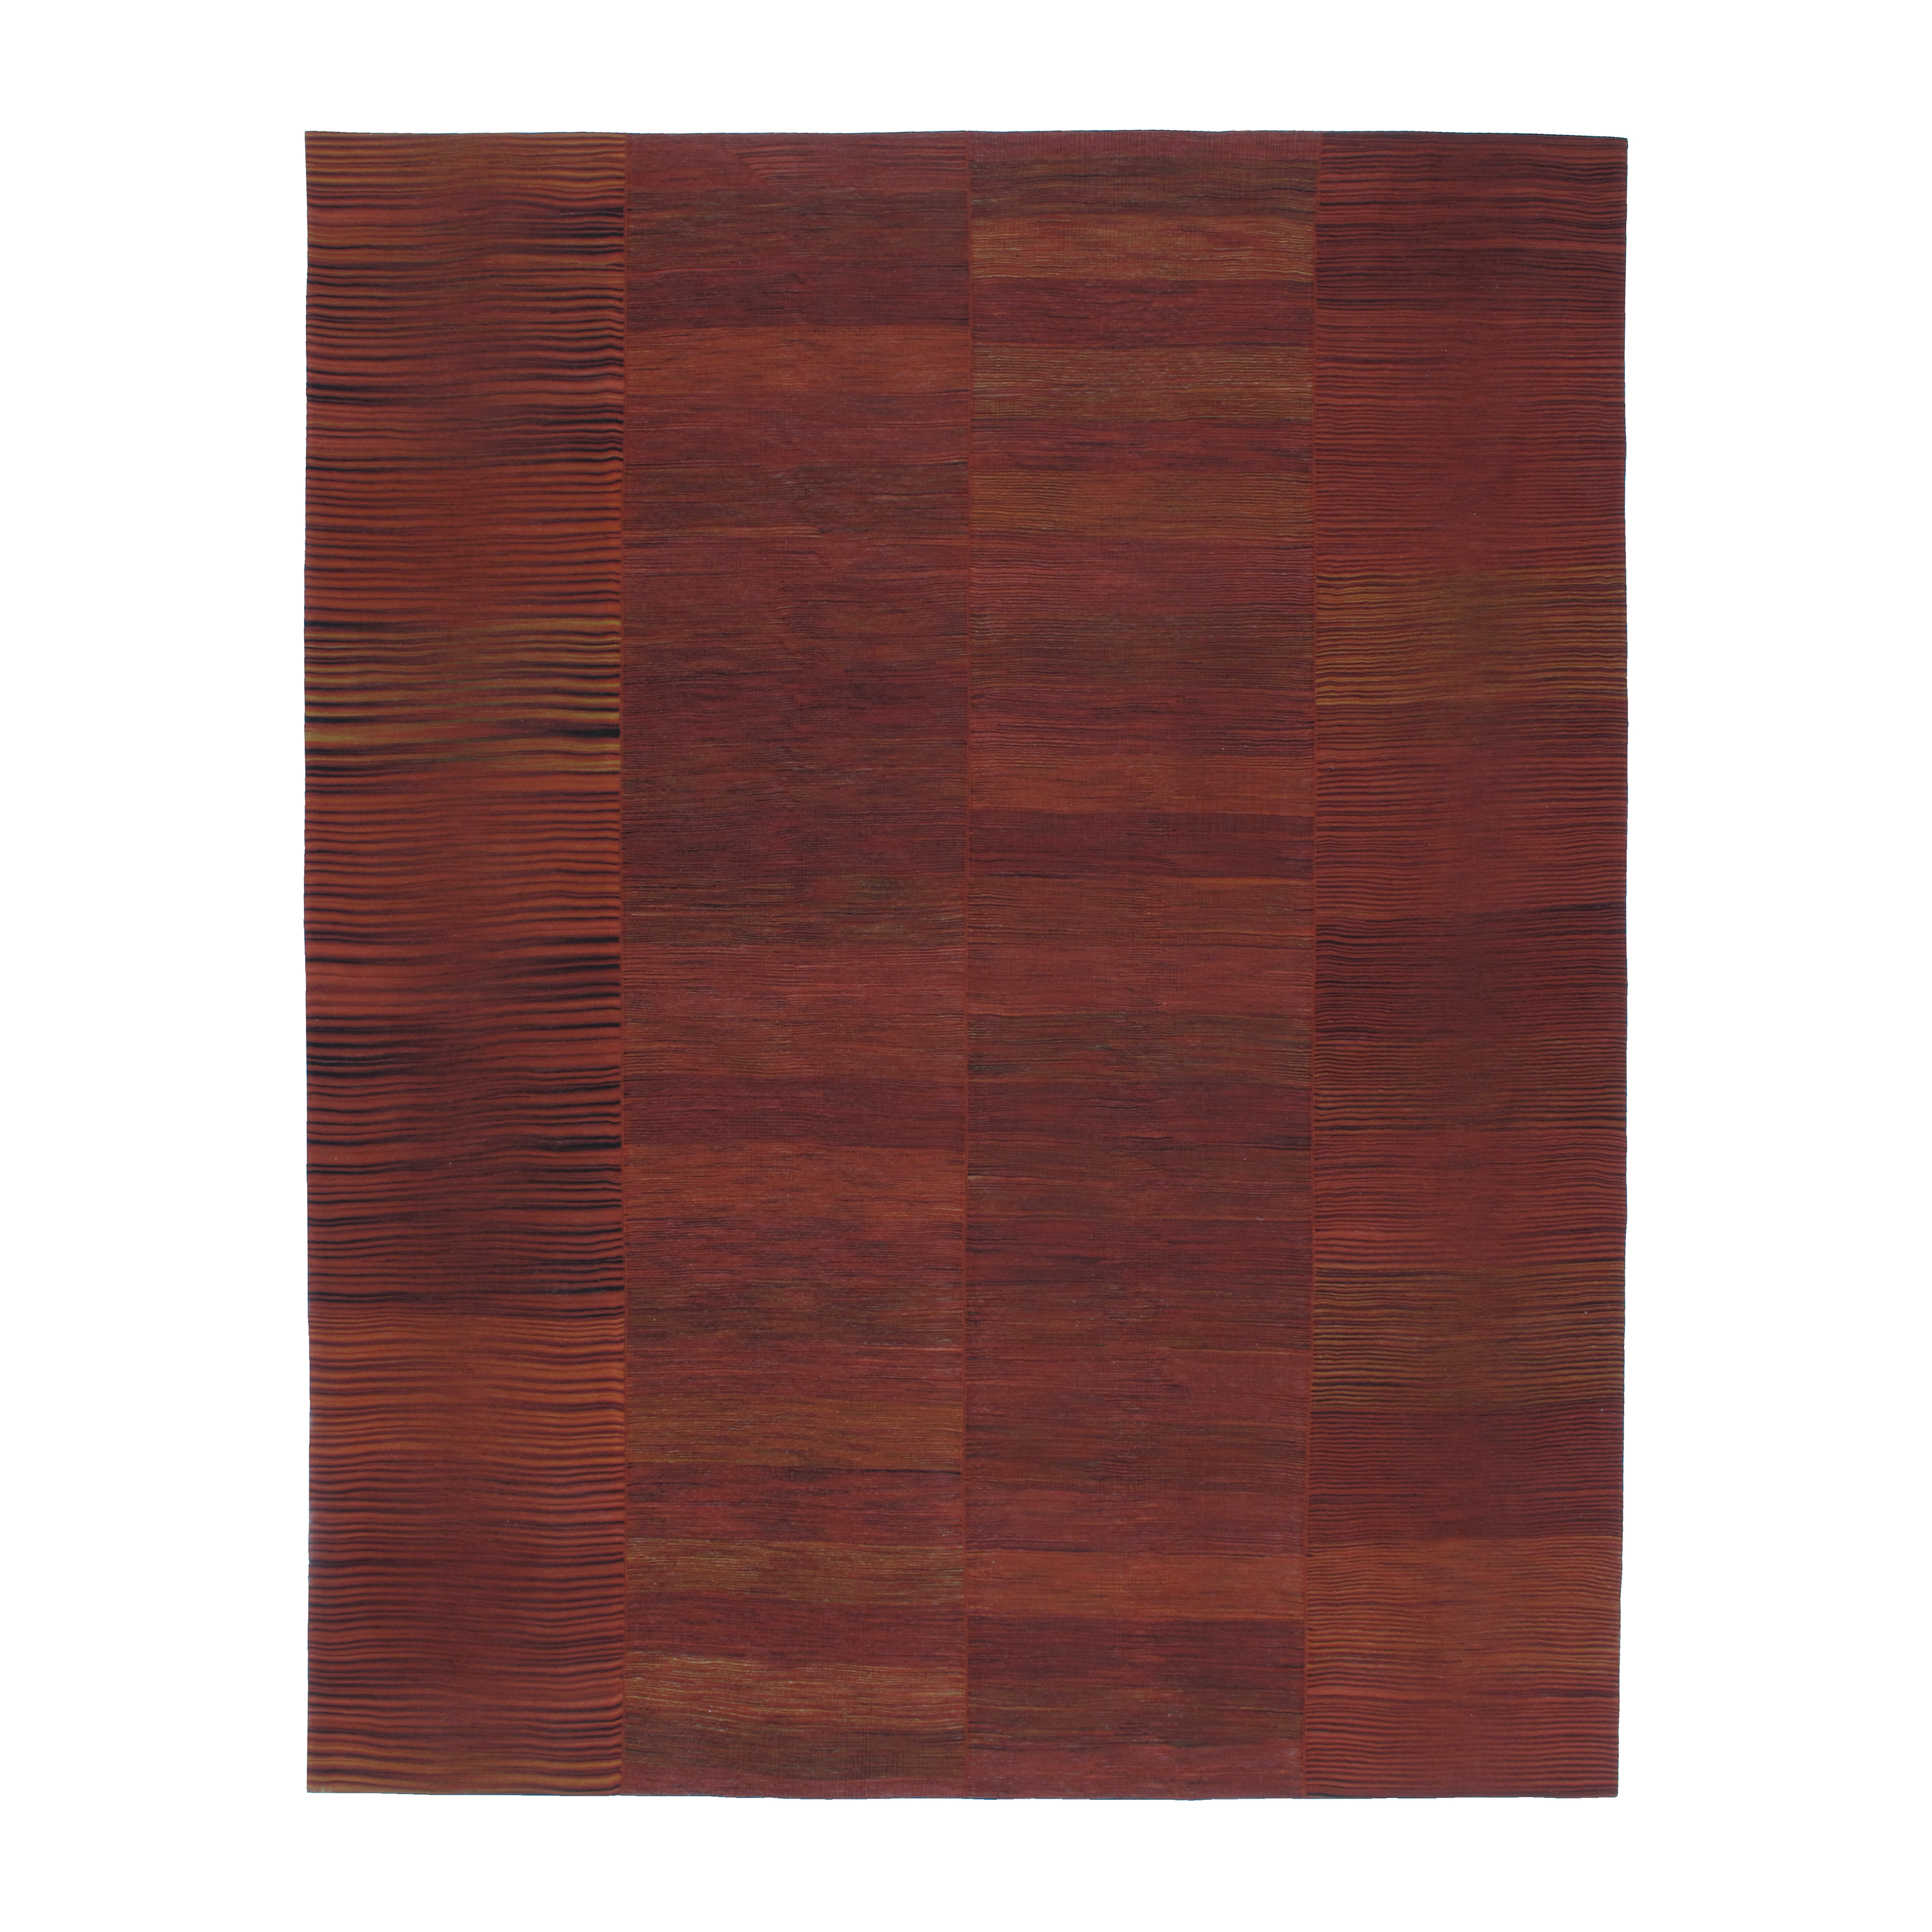 This Mazandaran rug is hand woven and crafted with hand spun wool.